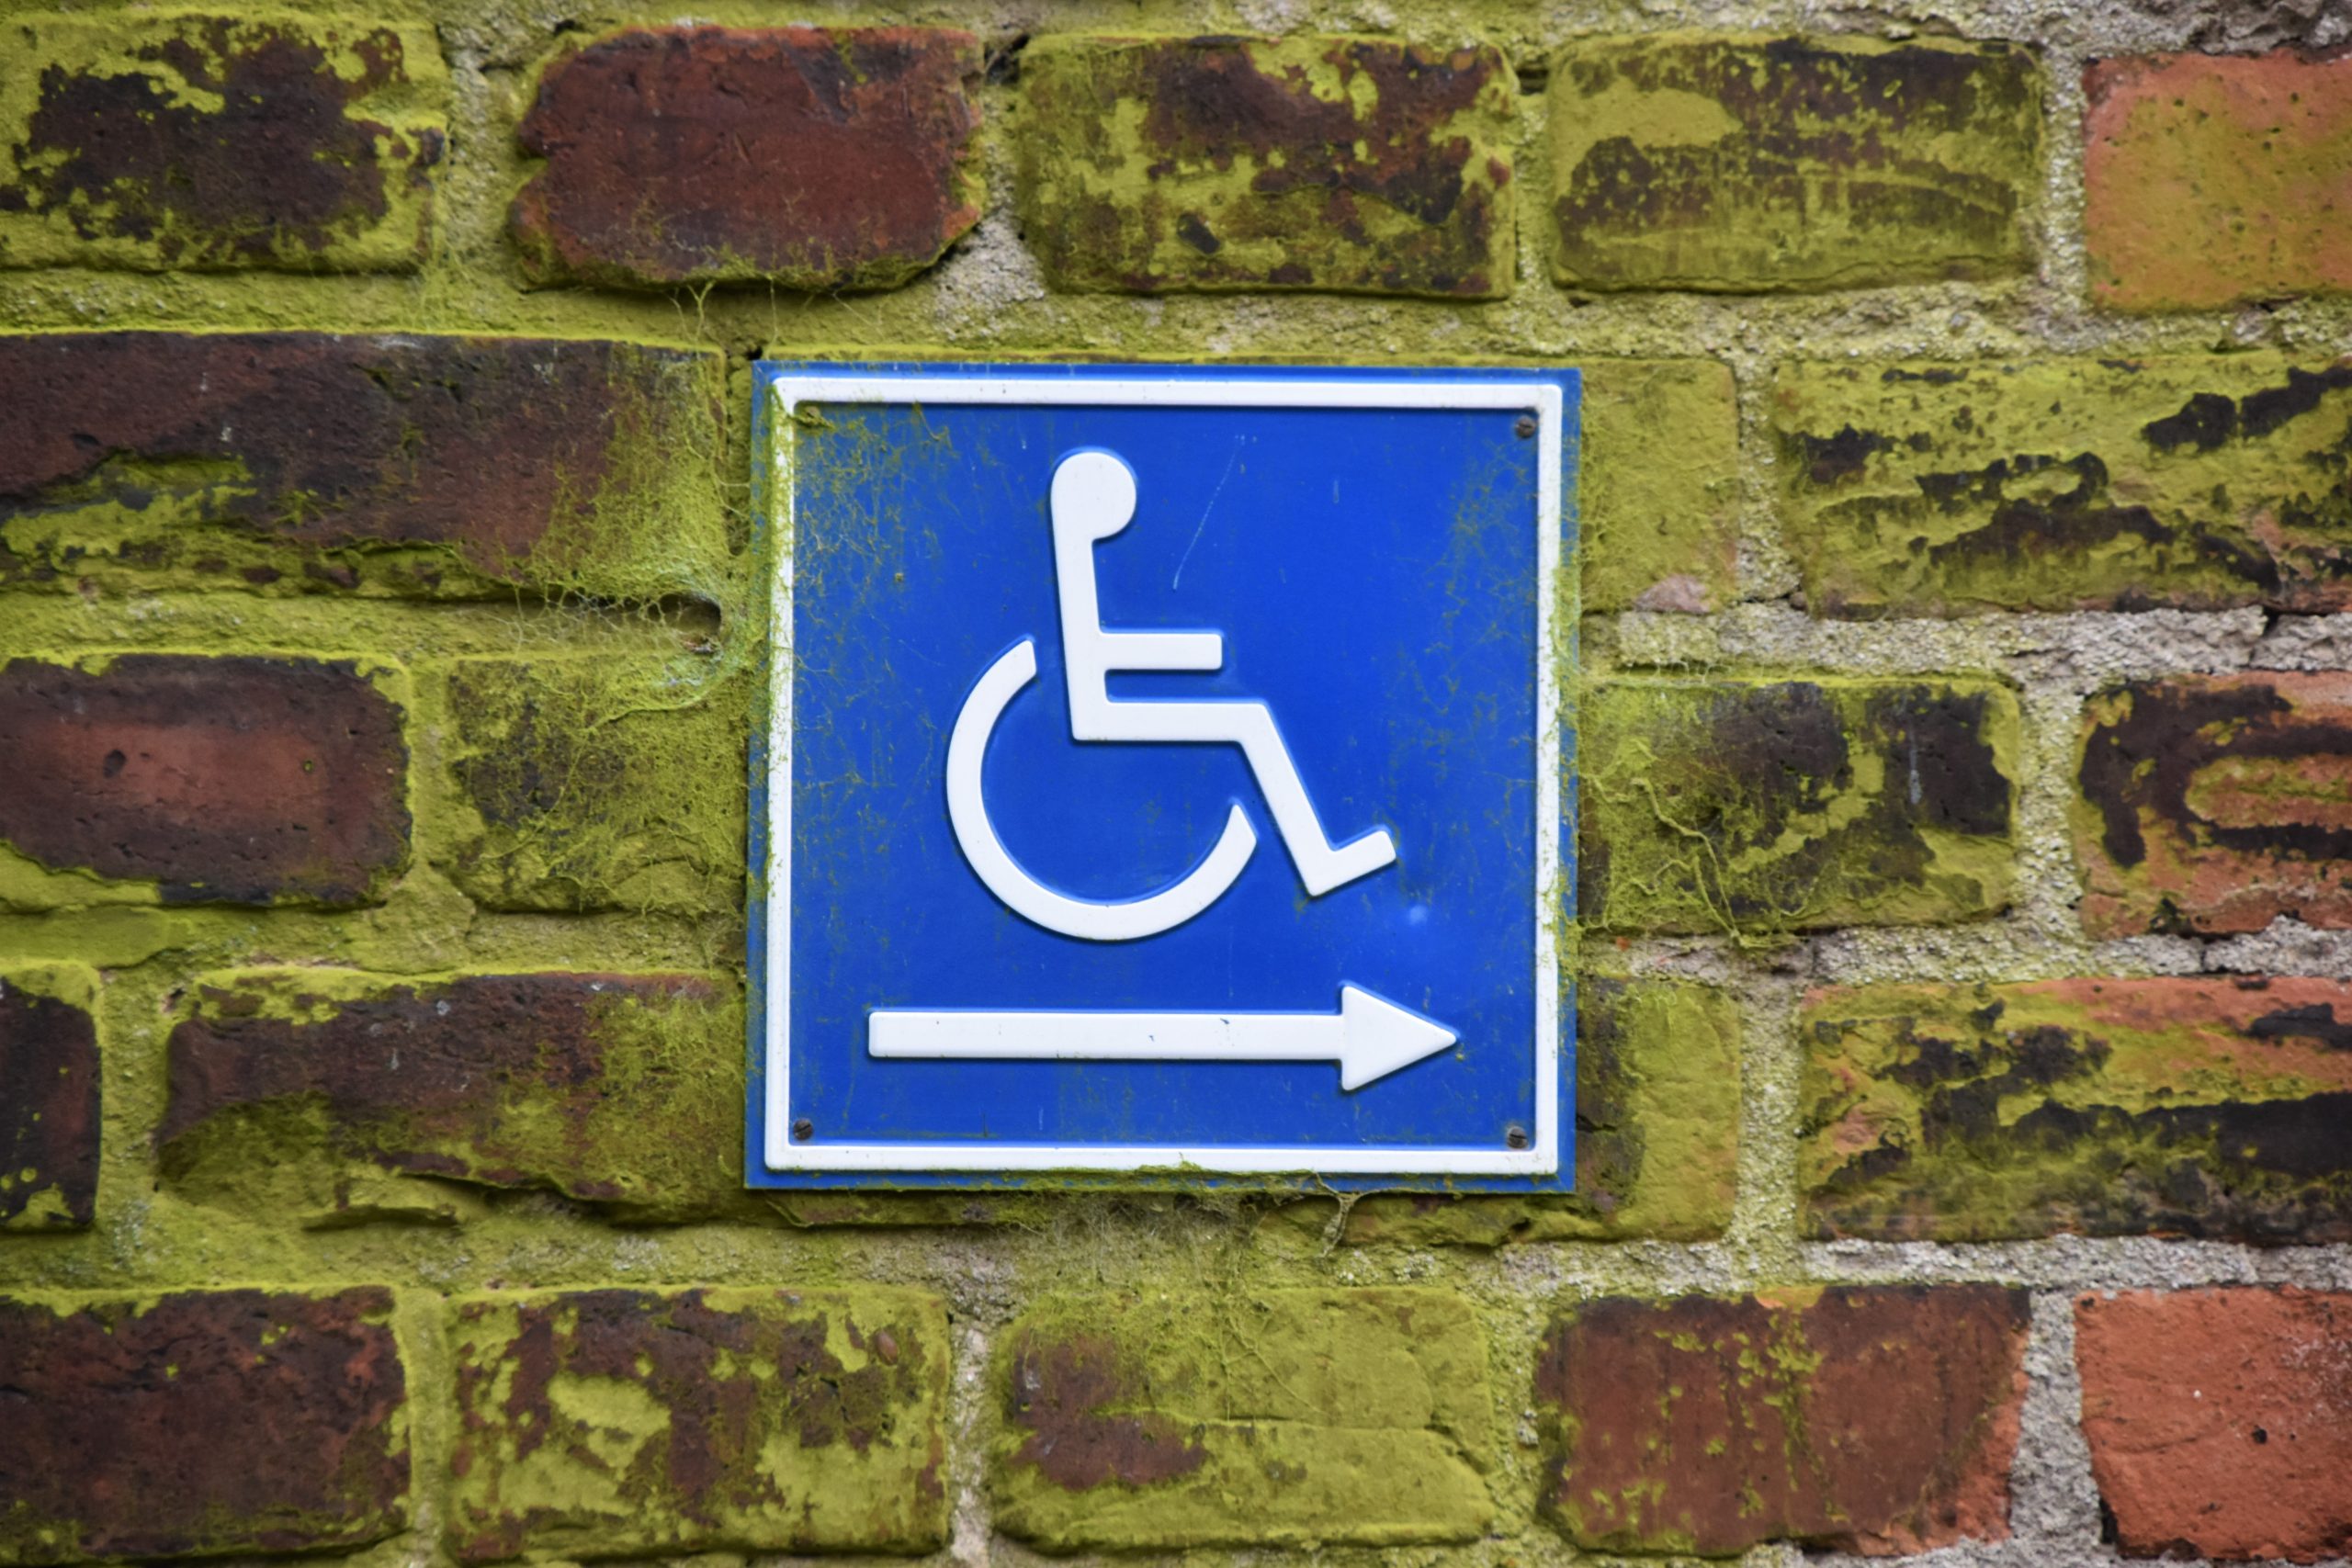 A photograph of a square blue sign with the white international wheelchair symbol on it. Below the image of the white figure in the wheelchair is a white arrow pointing to the right. The sign is on an old brick wall covered in green moss.